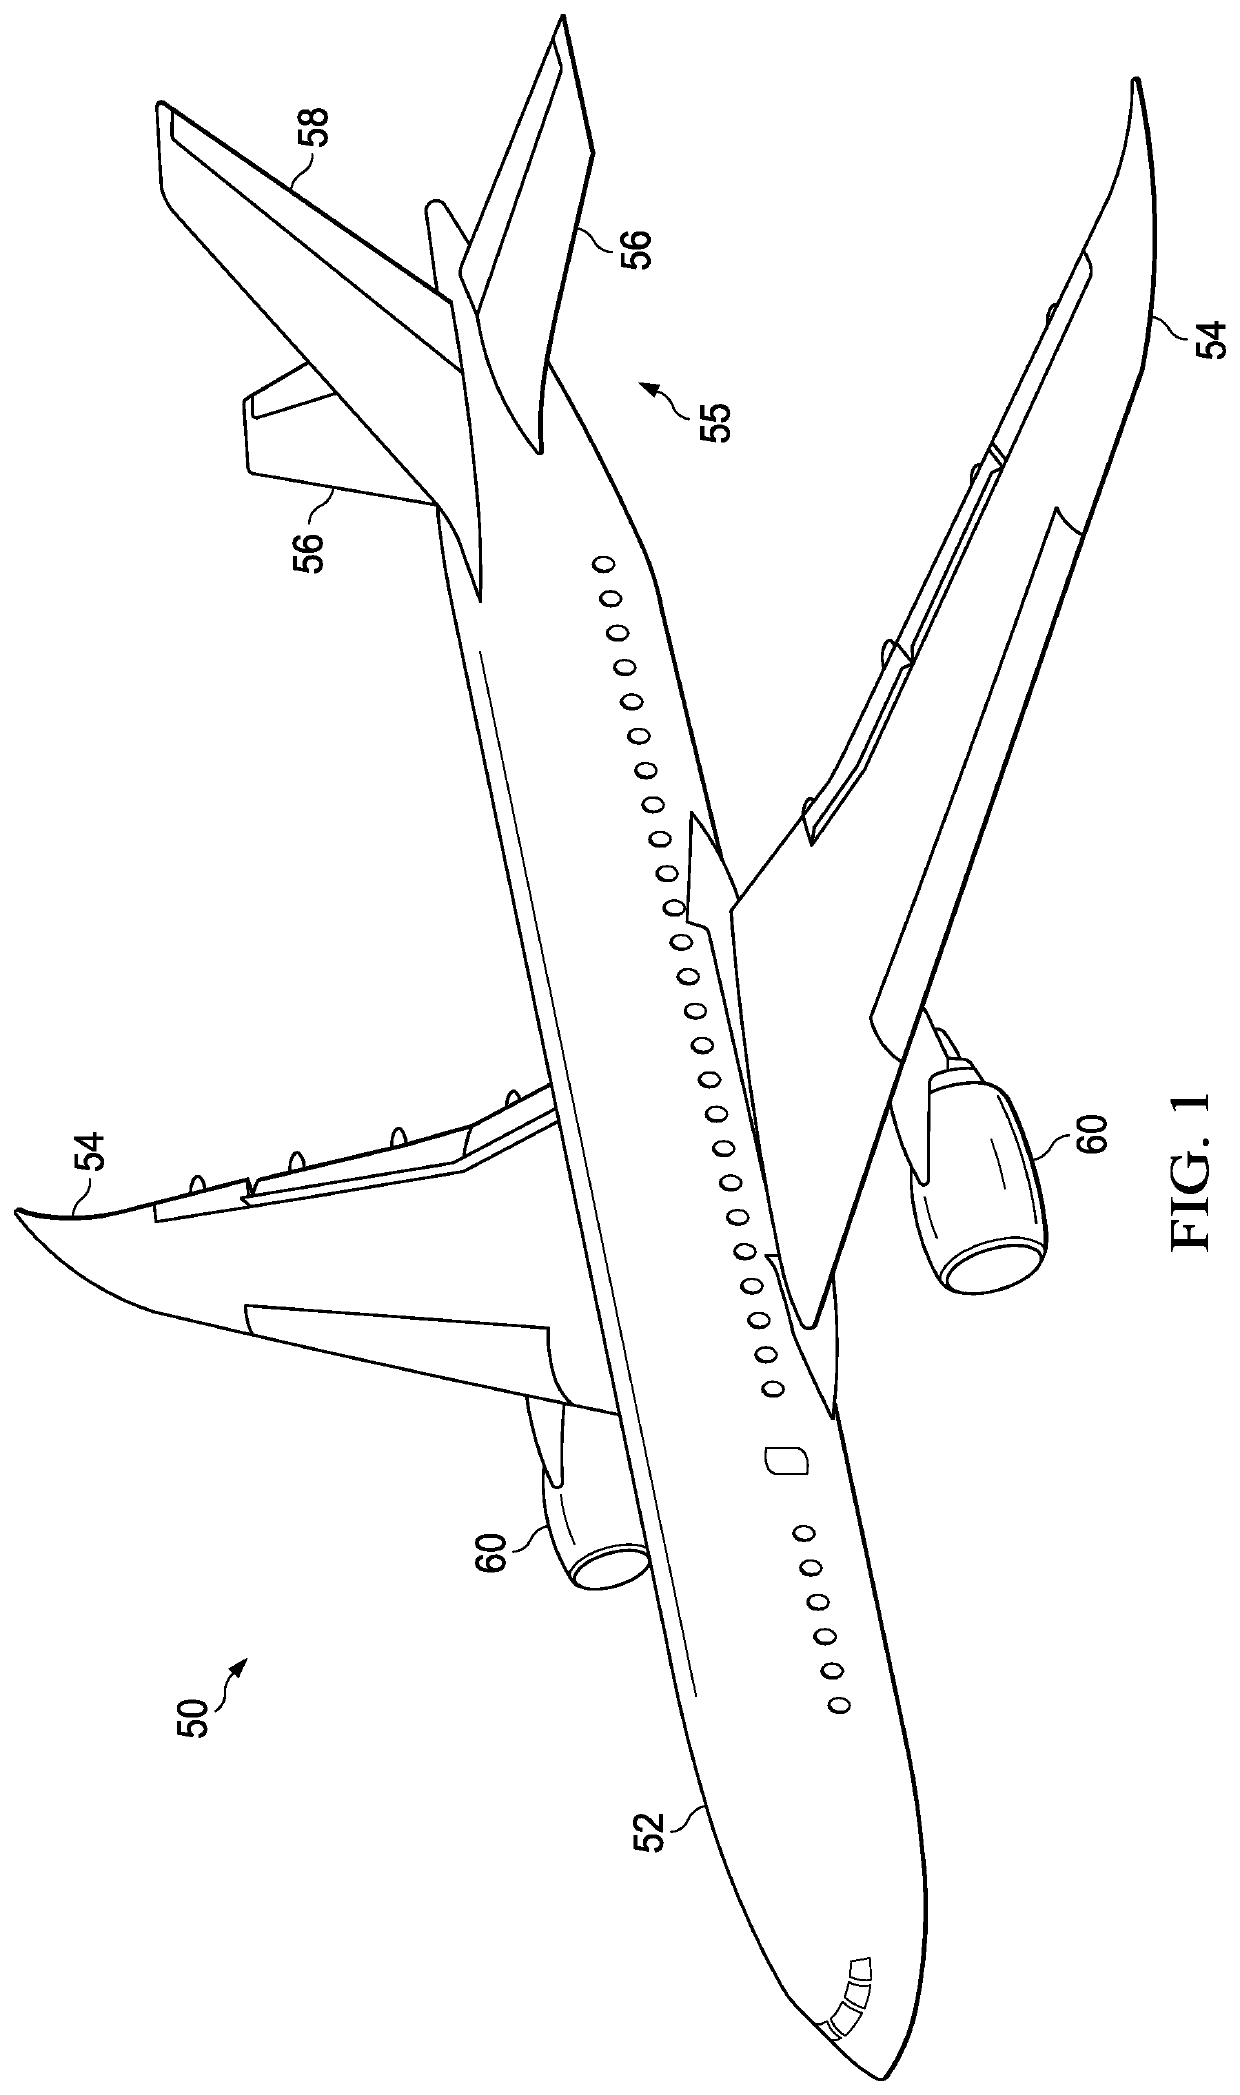 Composite Wing Panels and Fabrication Method